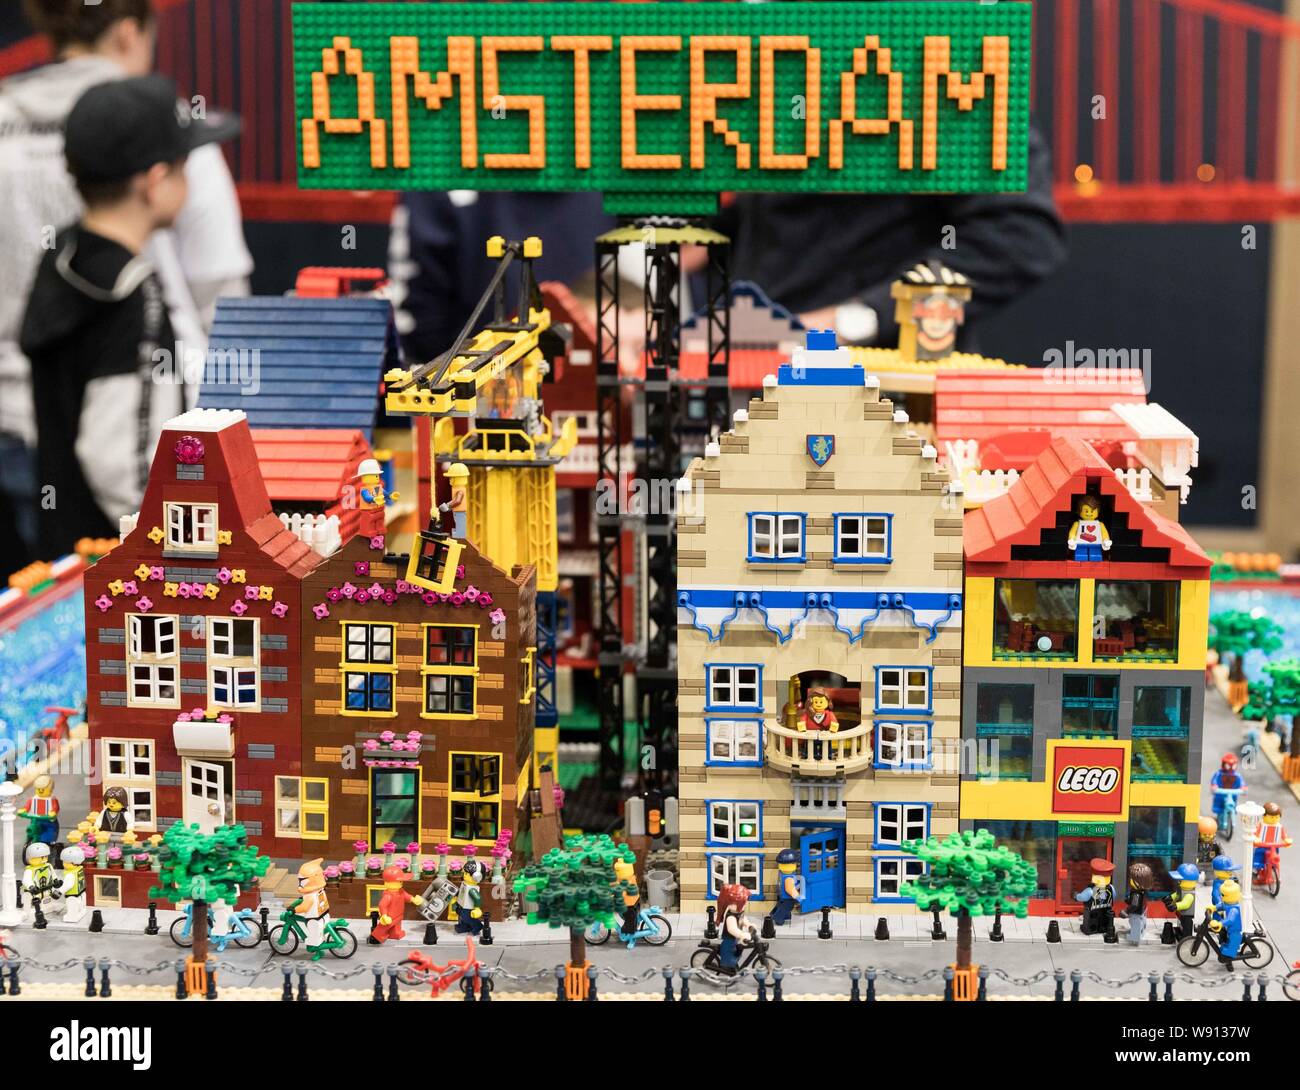 Canberra, Australia. 11th Aug, 2019. LEGO works showing the city Amsterdam  is displayed at the Brick Expo in Canberra, capital of Australia, Aug. 11,  2019. Held in the Hellenic Club of Canberra,